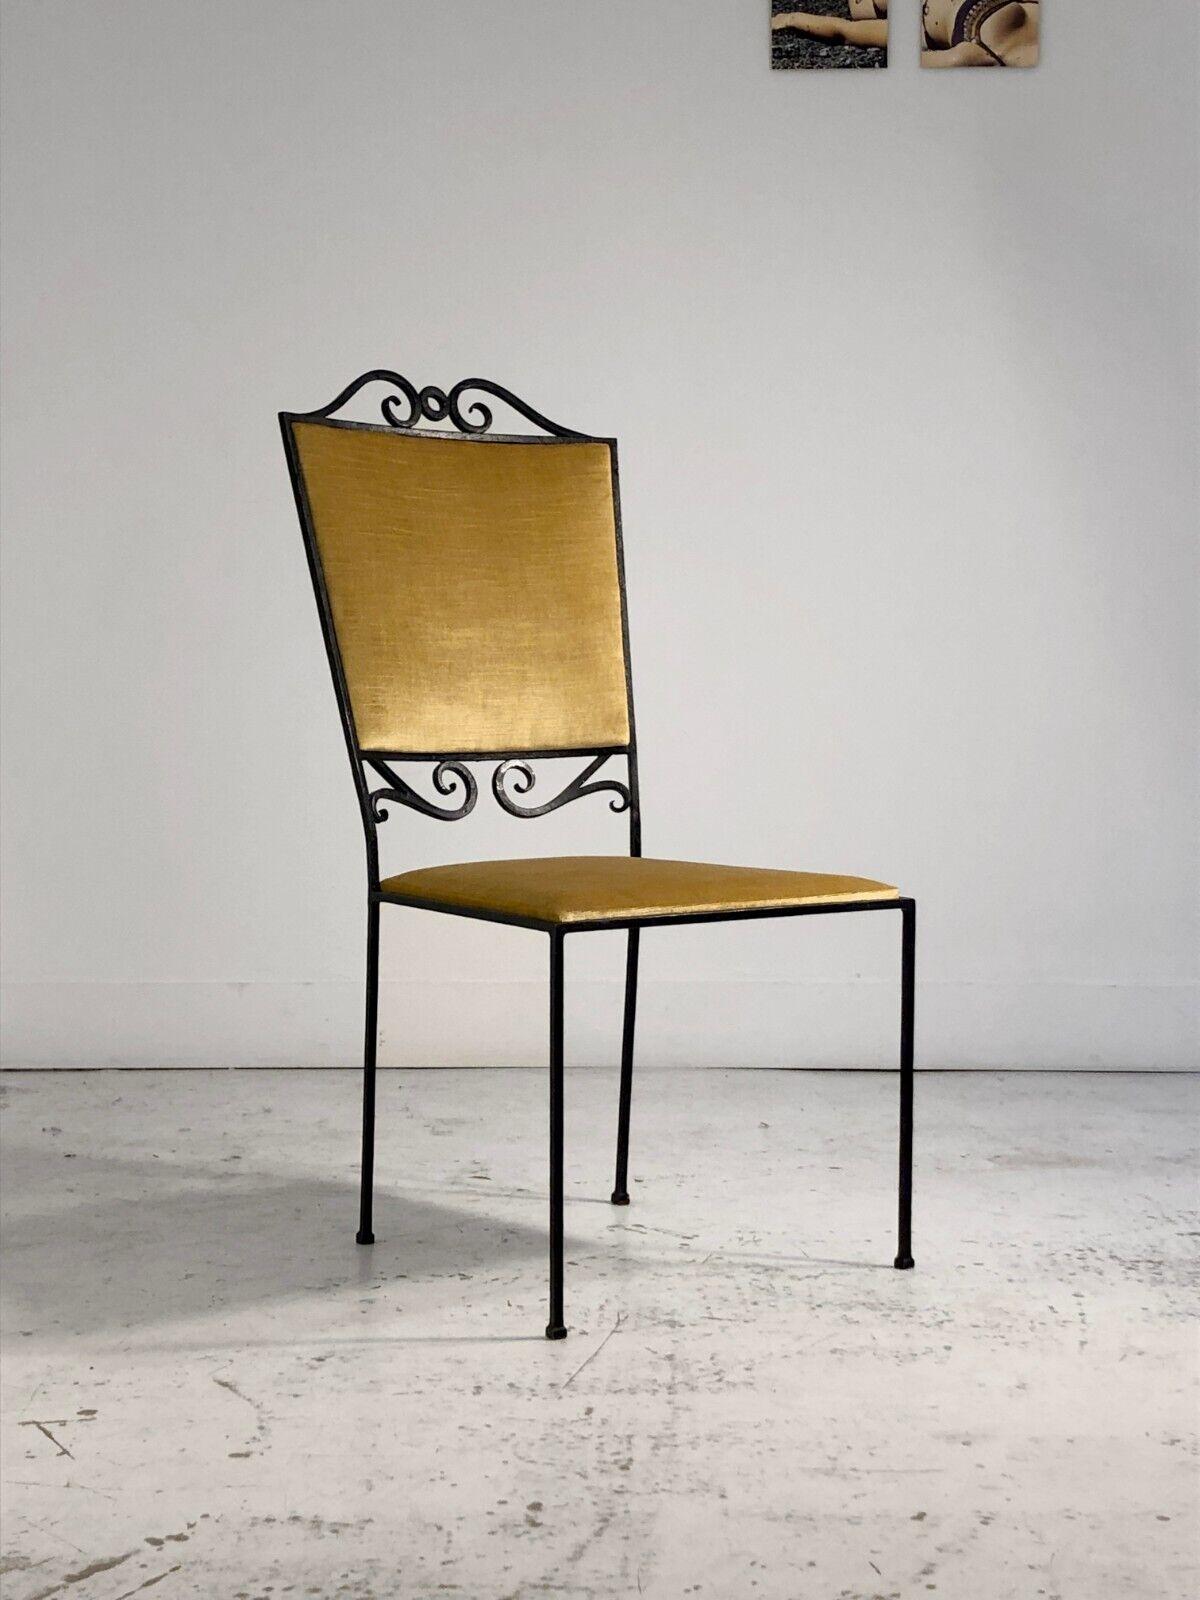 An astonishing, sculptural and very decorative chair, Post-Modernist, Neo-Classical, wrought iron structure with a square section with classically inspired decorations, seat and backrest in yellow velvet, undoubtedly unique piece, artist's work to